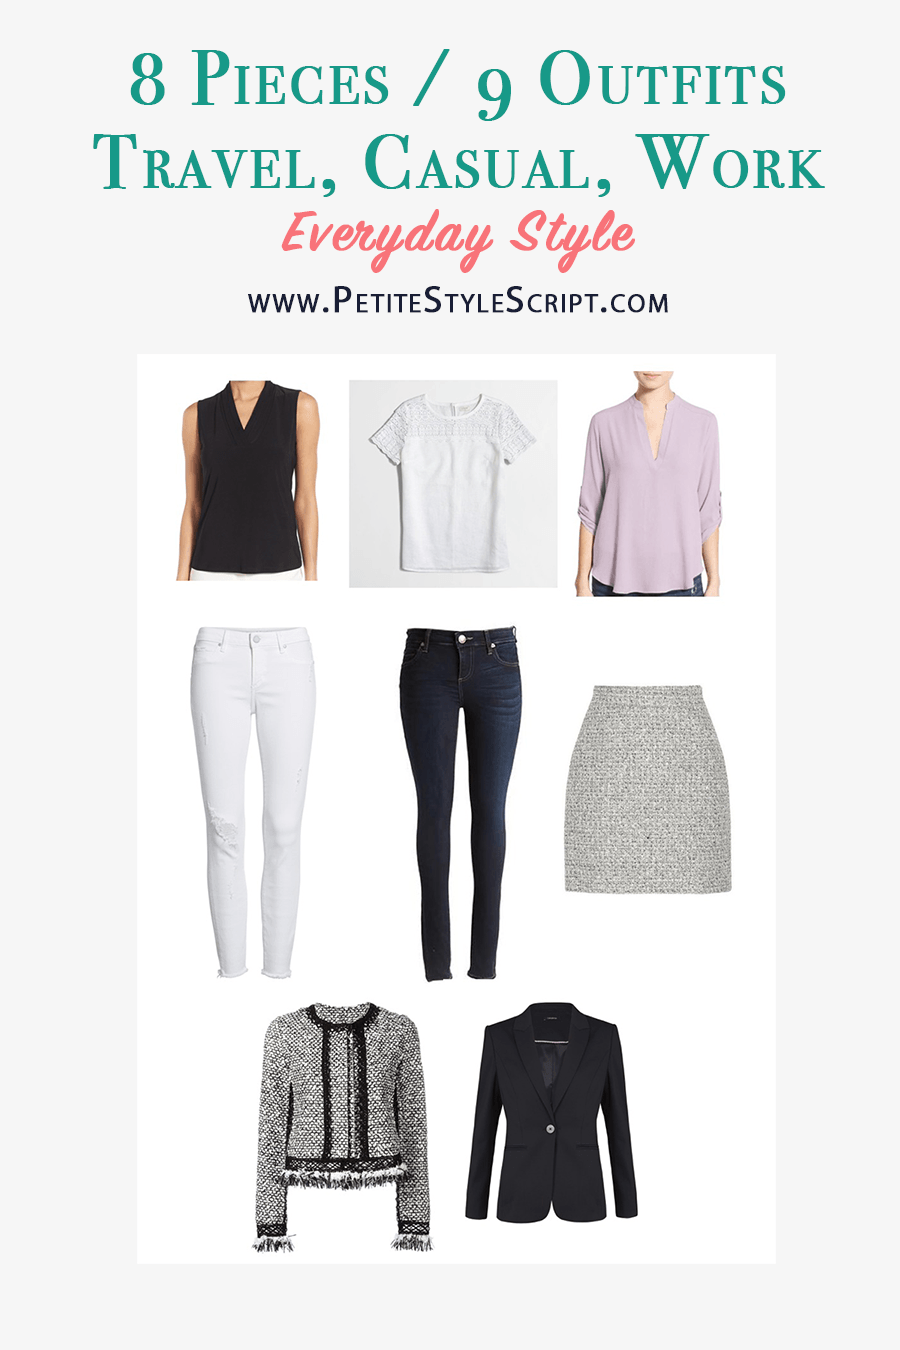 8 Pieces to Form 9 Outfit Ideas - Petite Style Script